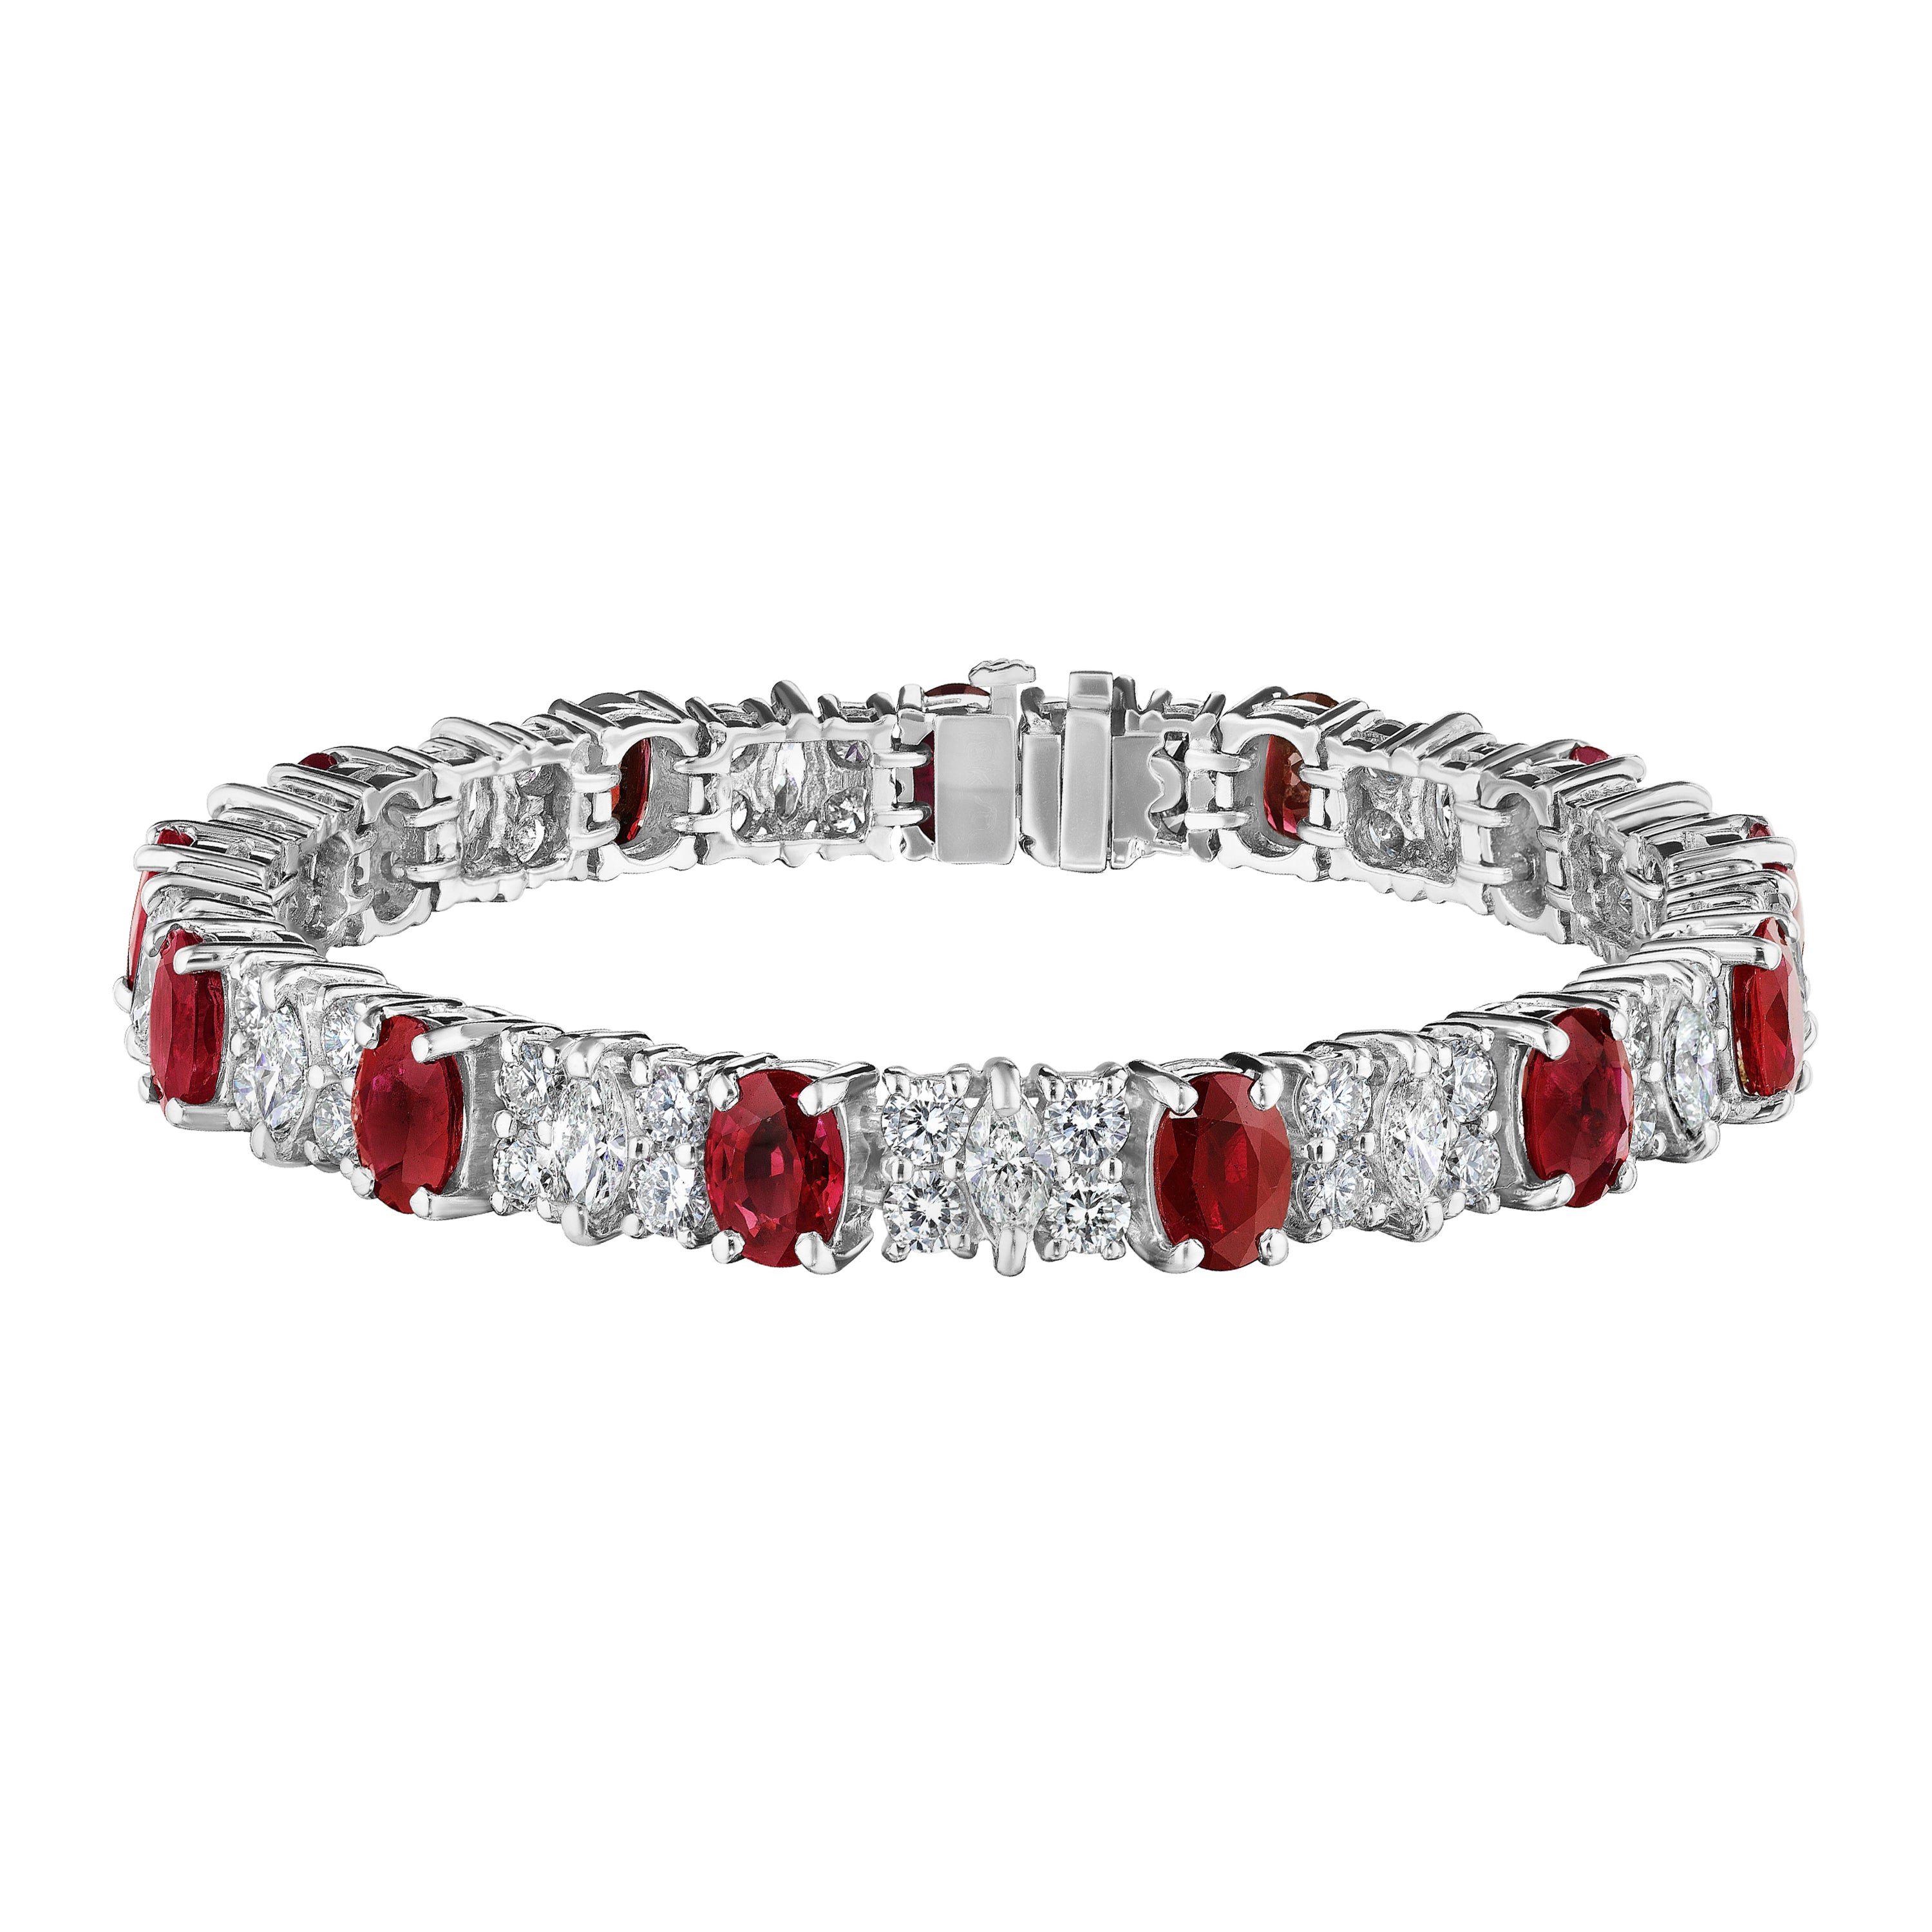 19.61ct Oval Ruby & Marquise Cut Diamond Bracelet in 18KT White Gold For Sale